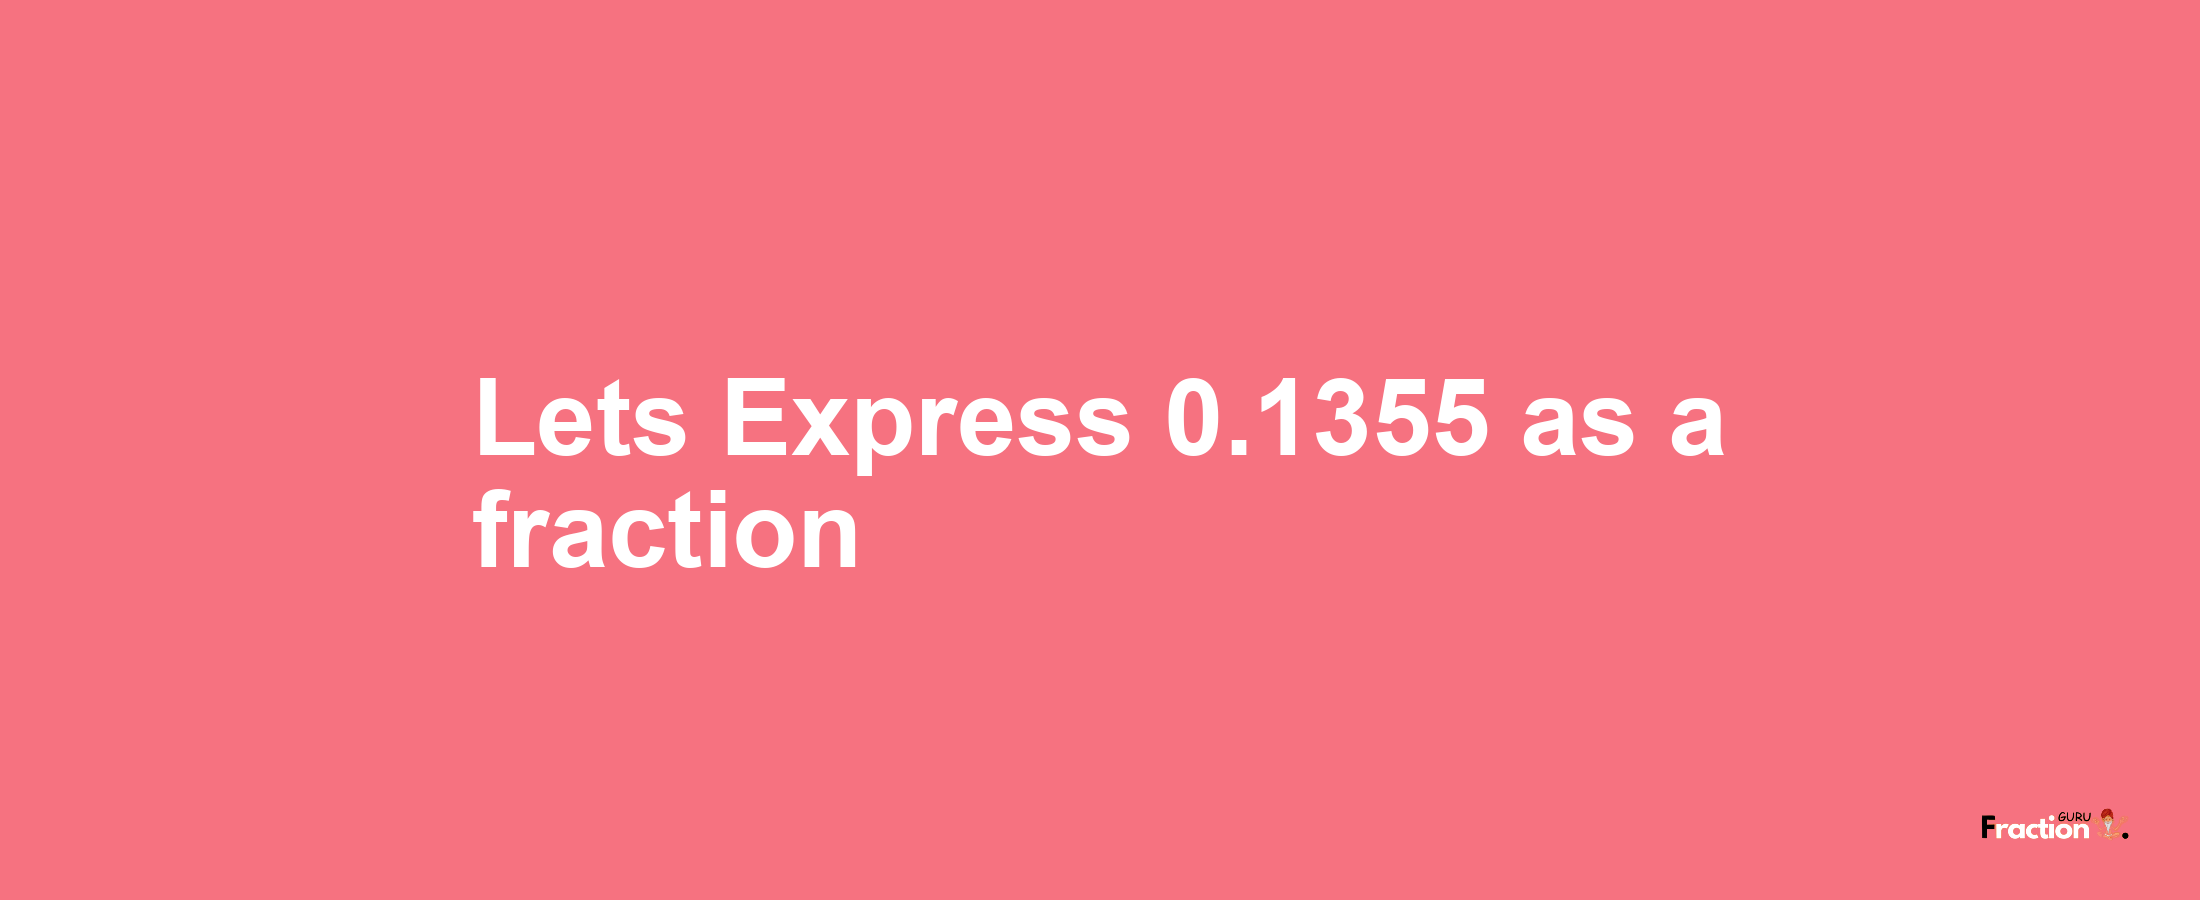 Lets Express 0.1355 as afraction